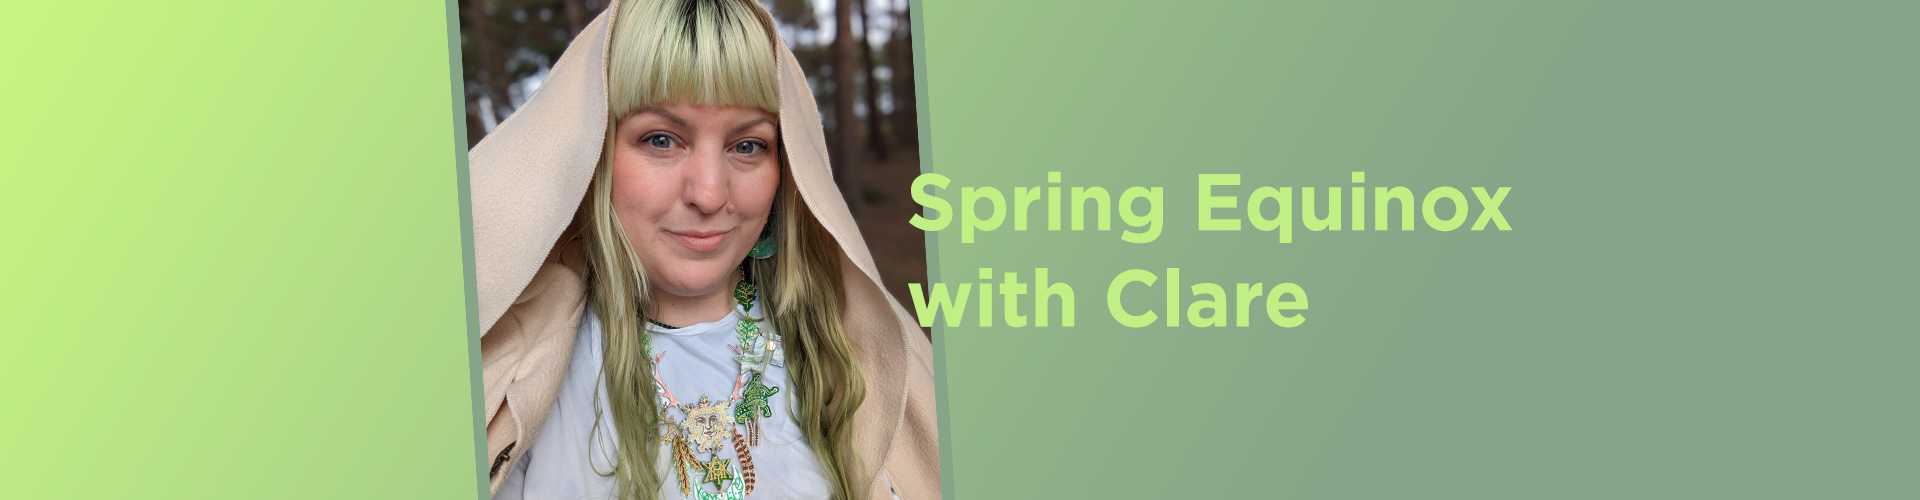 Spring Equinox with Clare